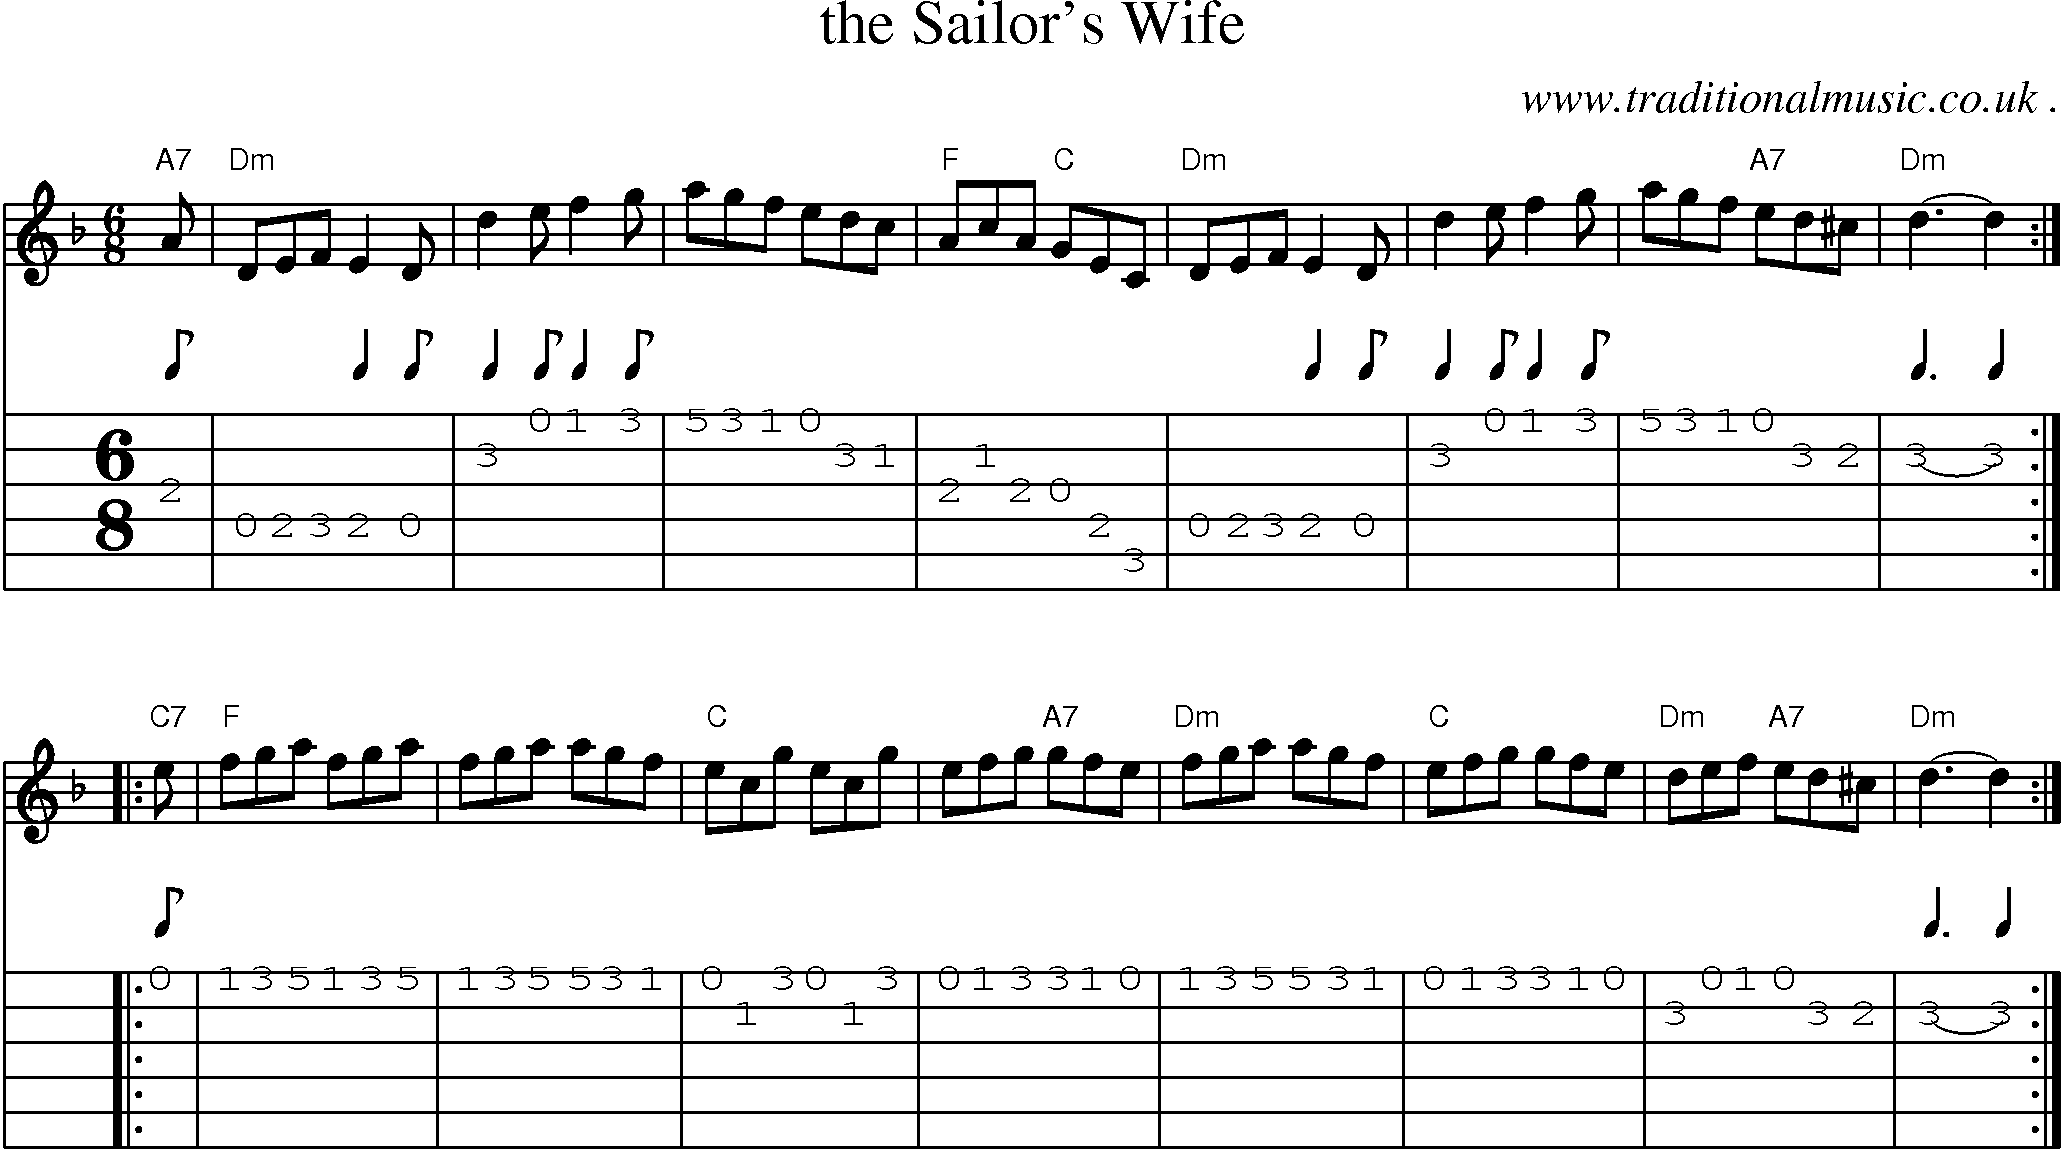 Sheet-music  score, Chords and Guitar Tabs for The Sailors Wife